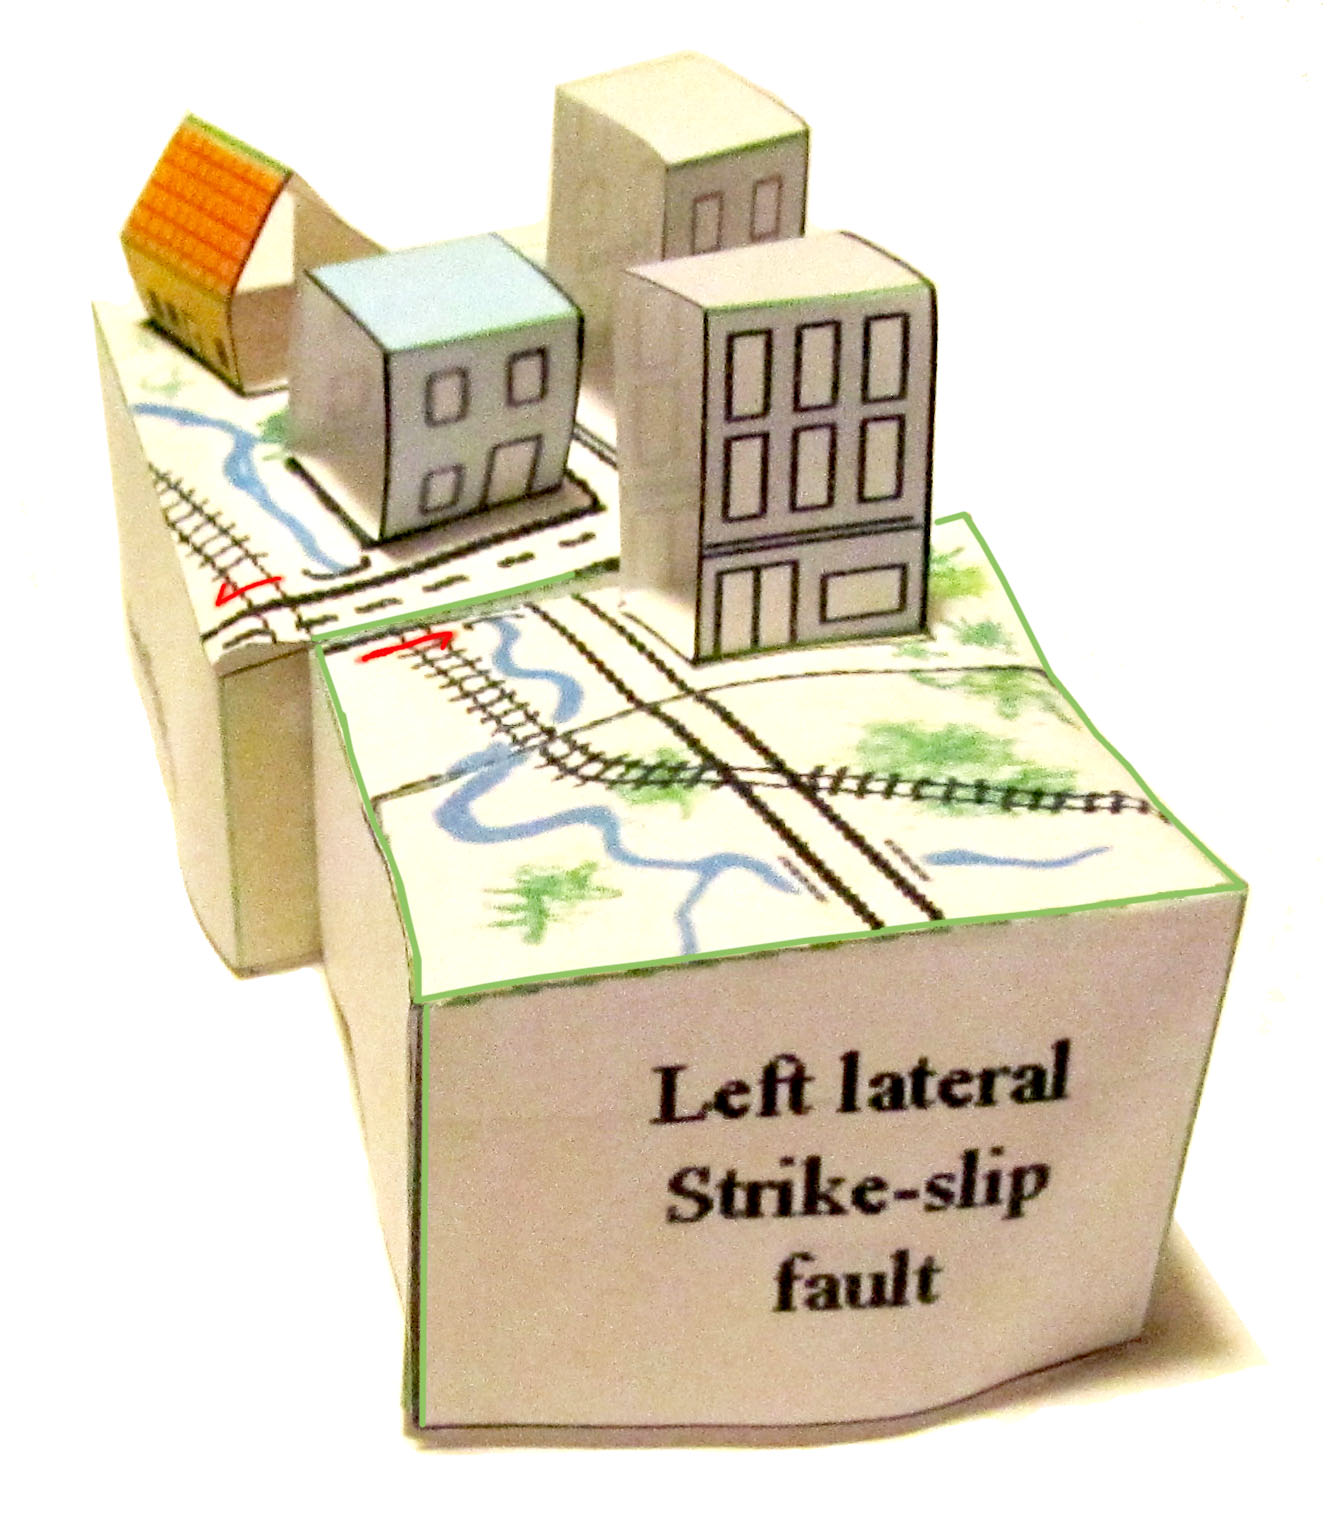 picture of left lateral fault model